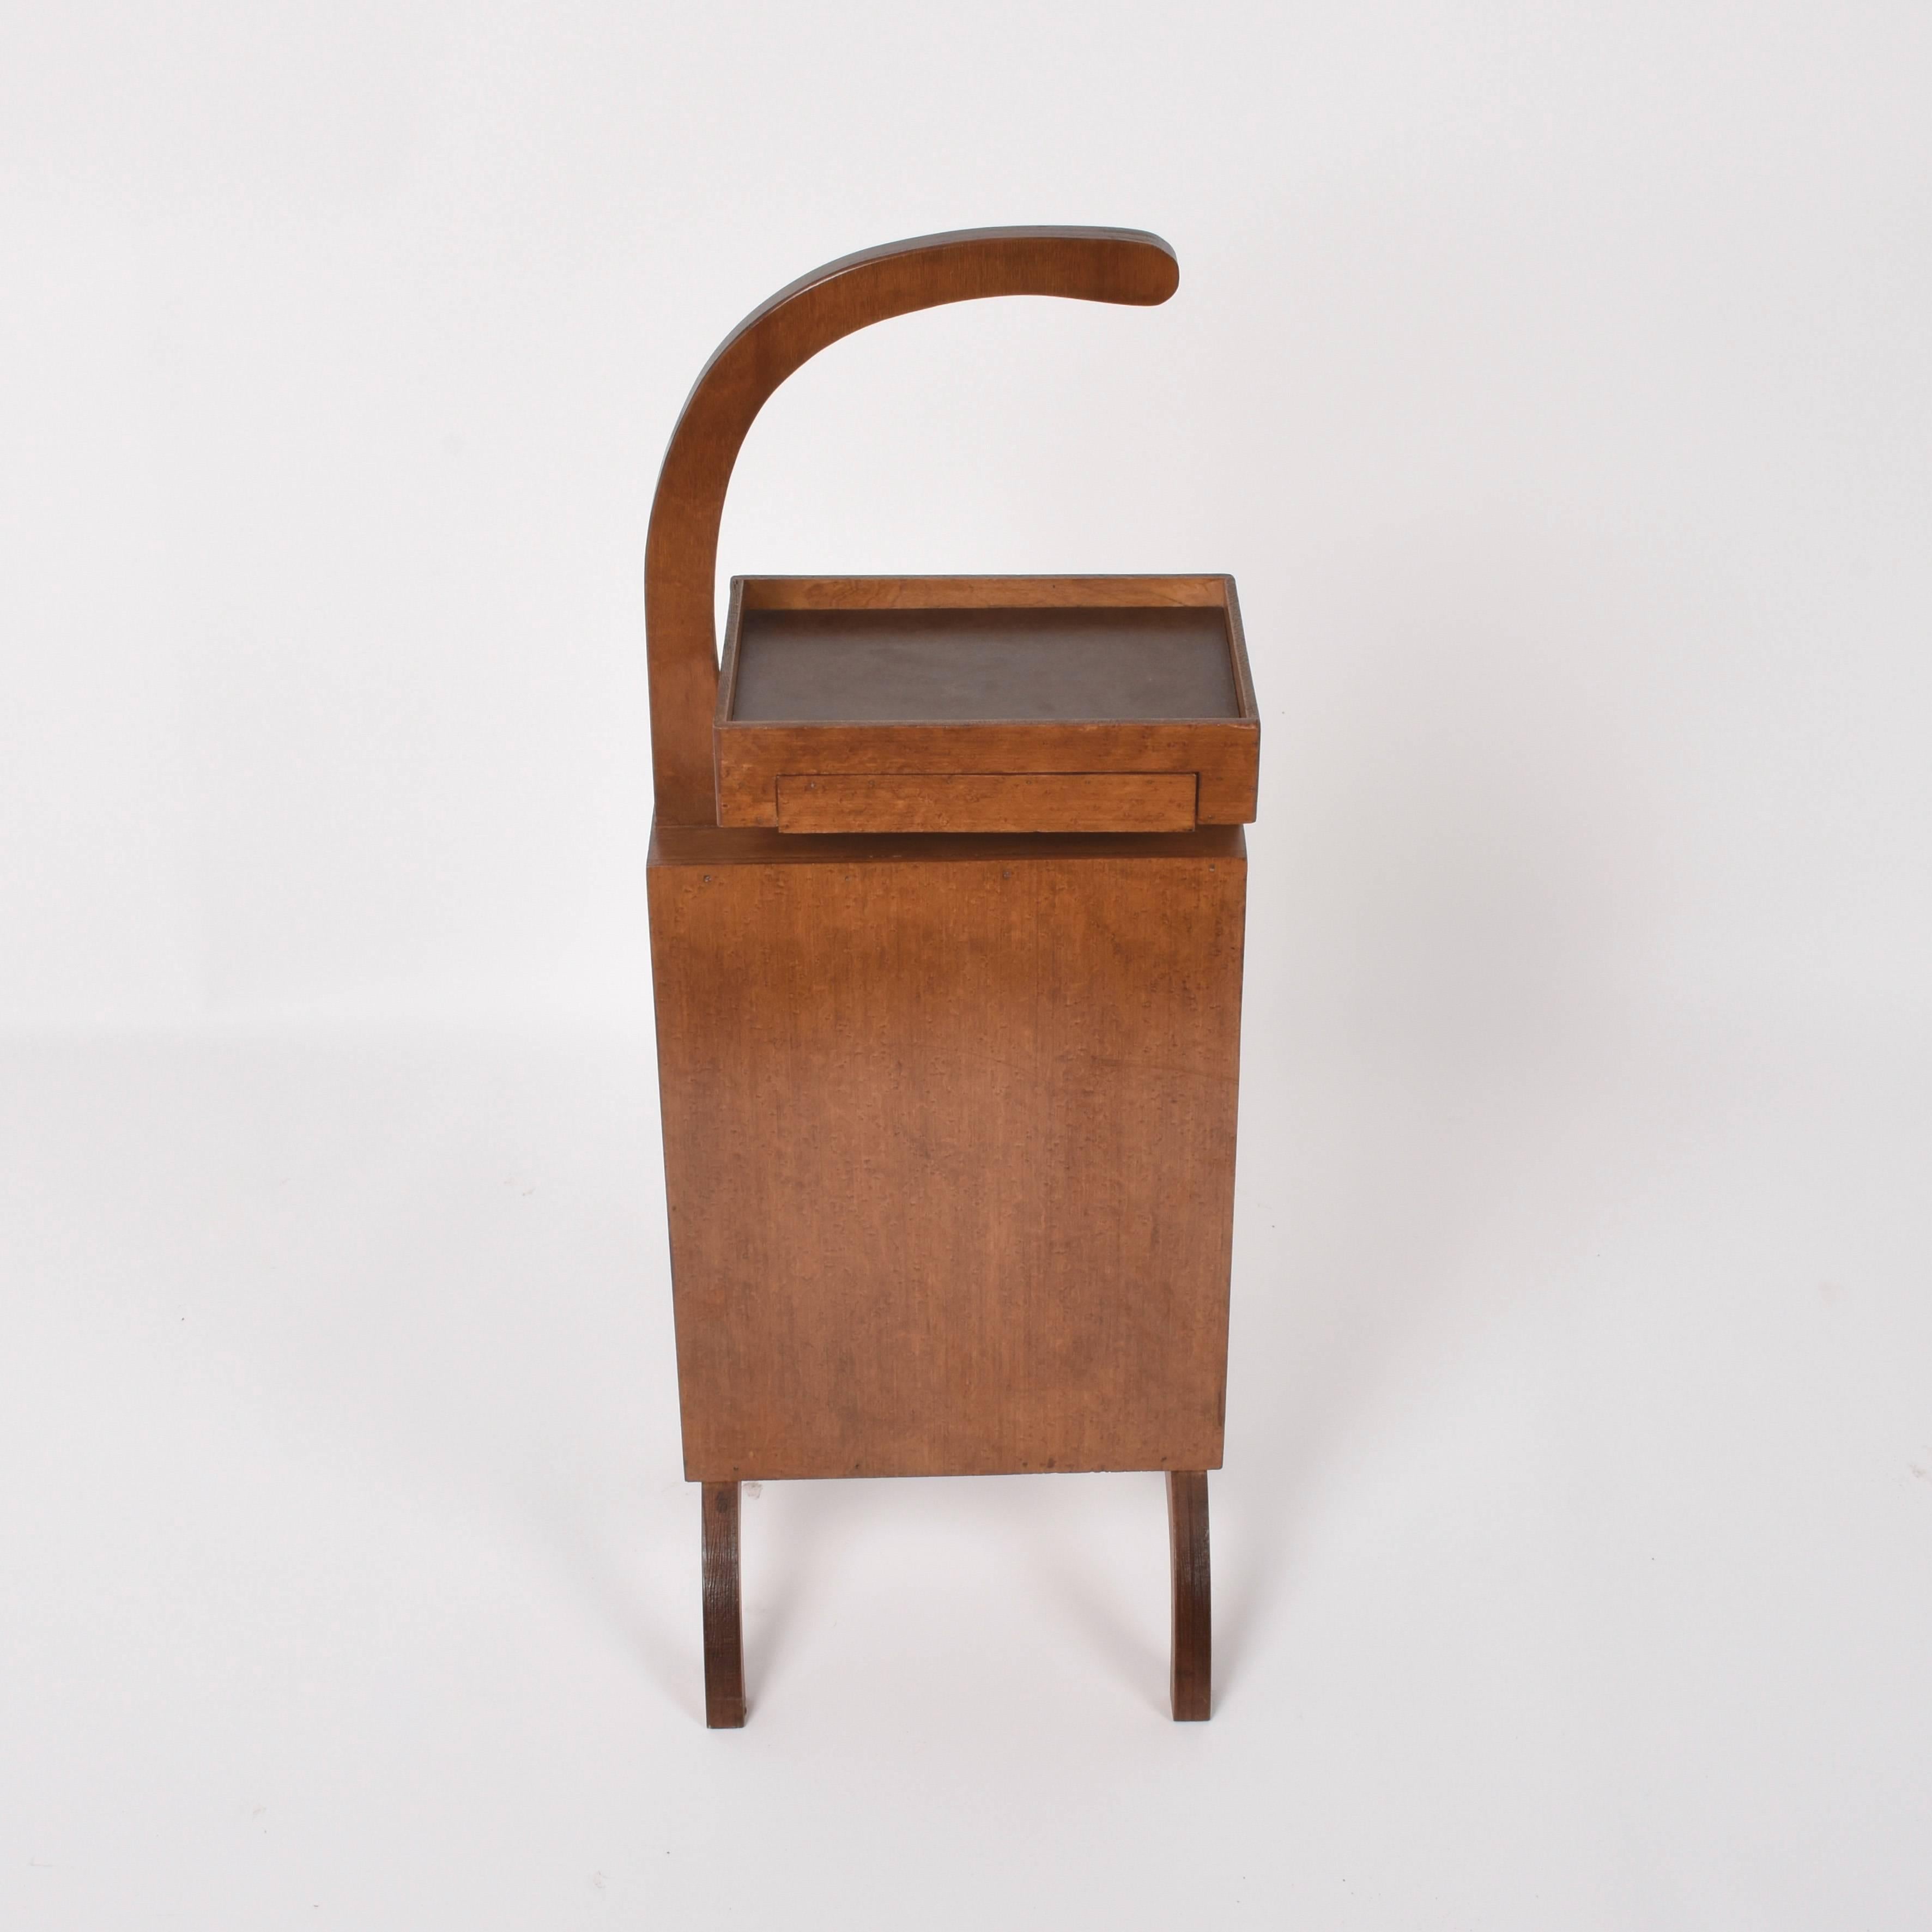 Smoke Table or Telephone. in Wood and Mdf Medium-Density Fibreboard, Italy 1960s 2